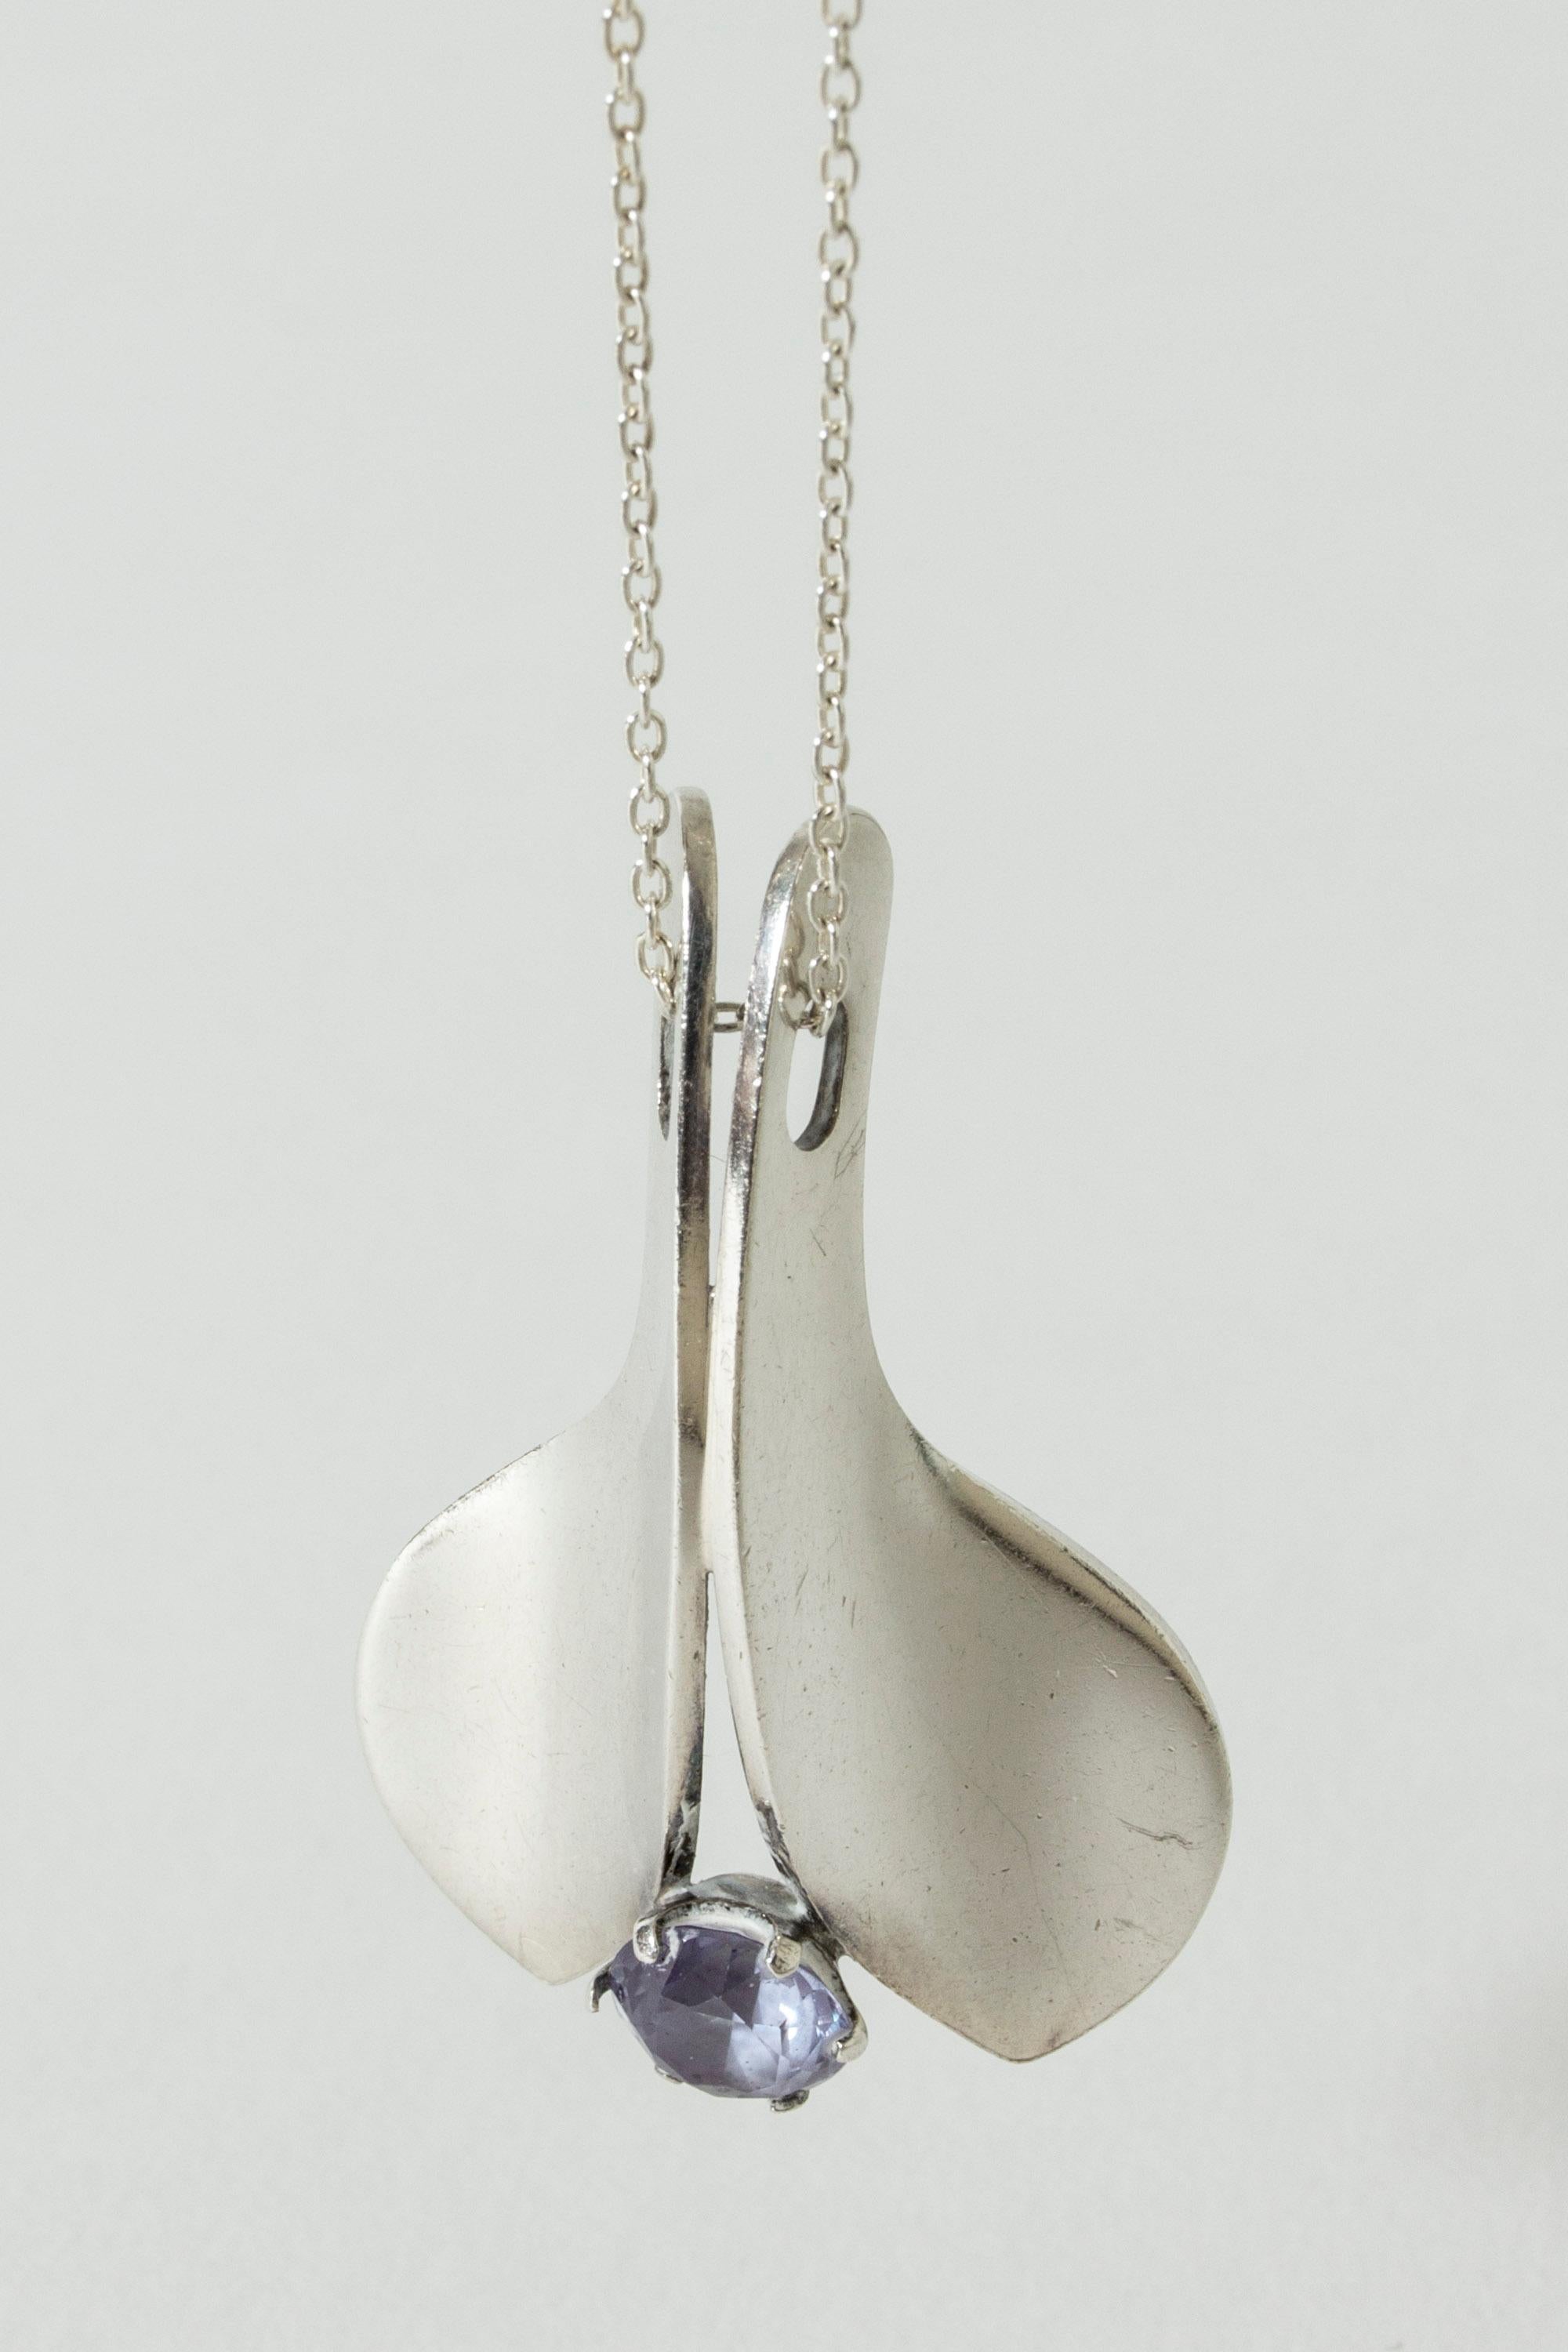 Lovely silver pendant by Elis Kauppi, in a smooth, streamlined design. A sparkly amethyst stone sits in the middle of the cleft.